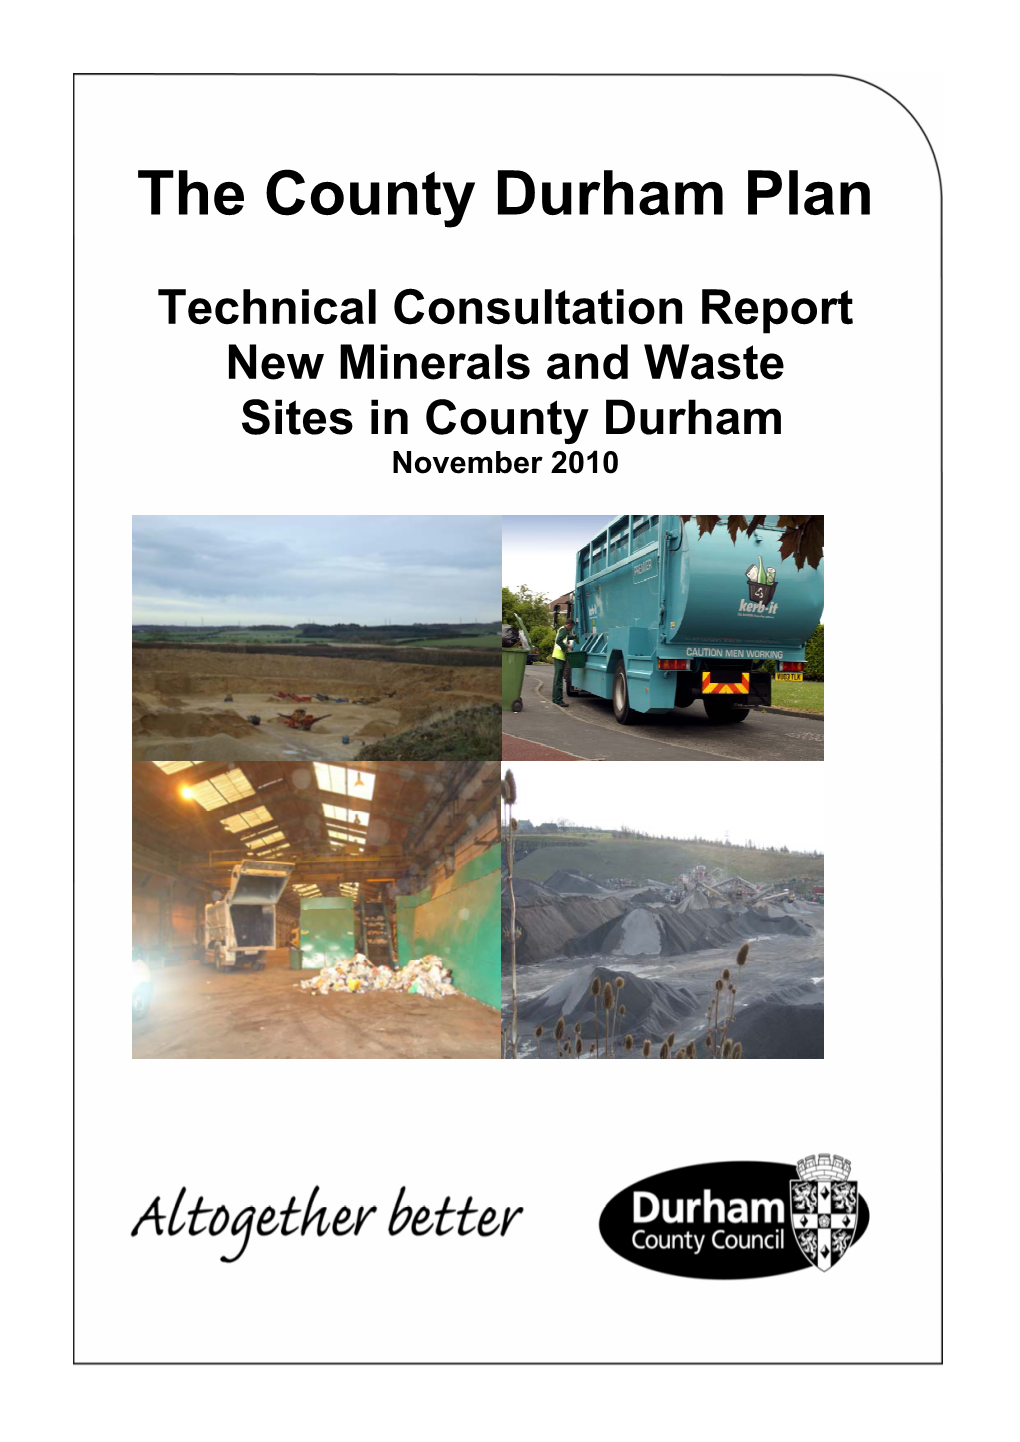 Technical Consultation Report: New Minerals and Waste Sites County Durham Plan Contents